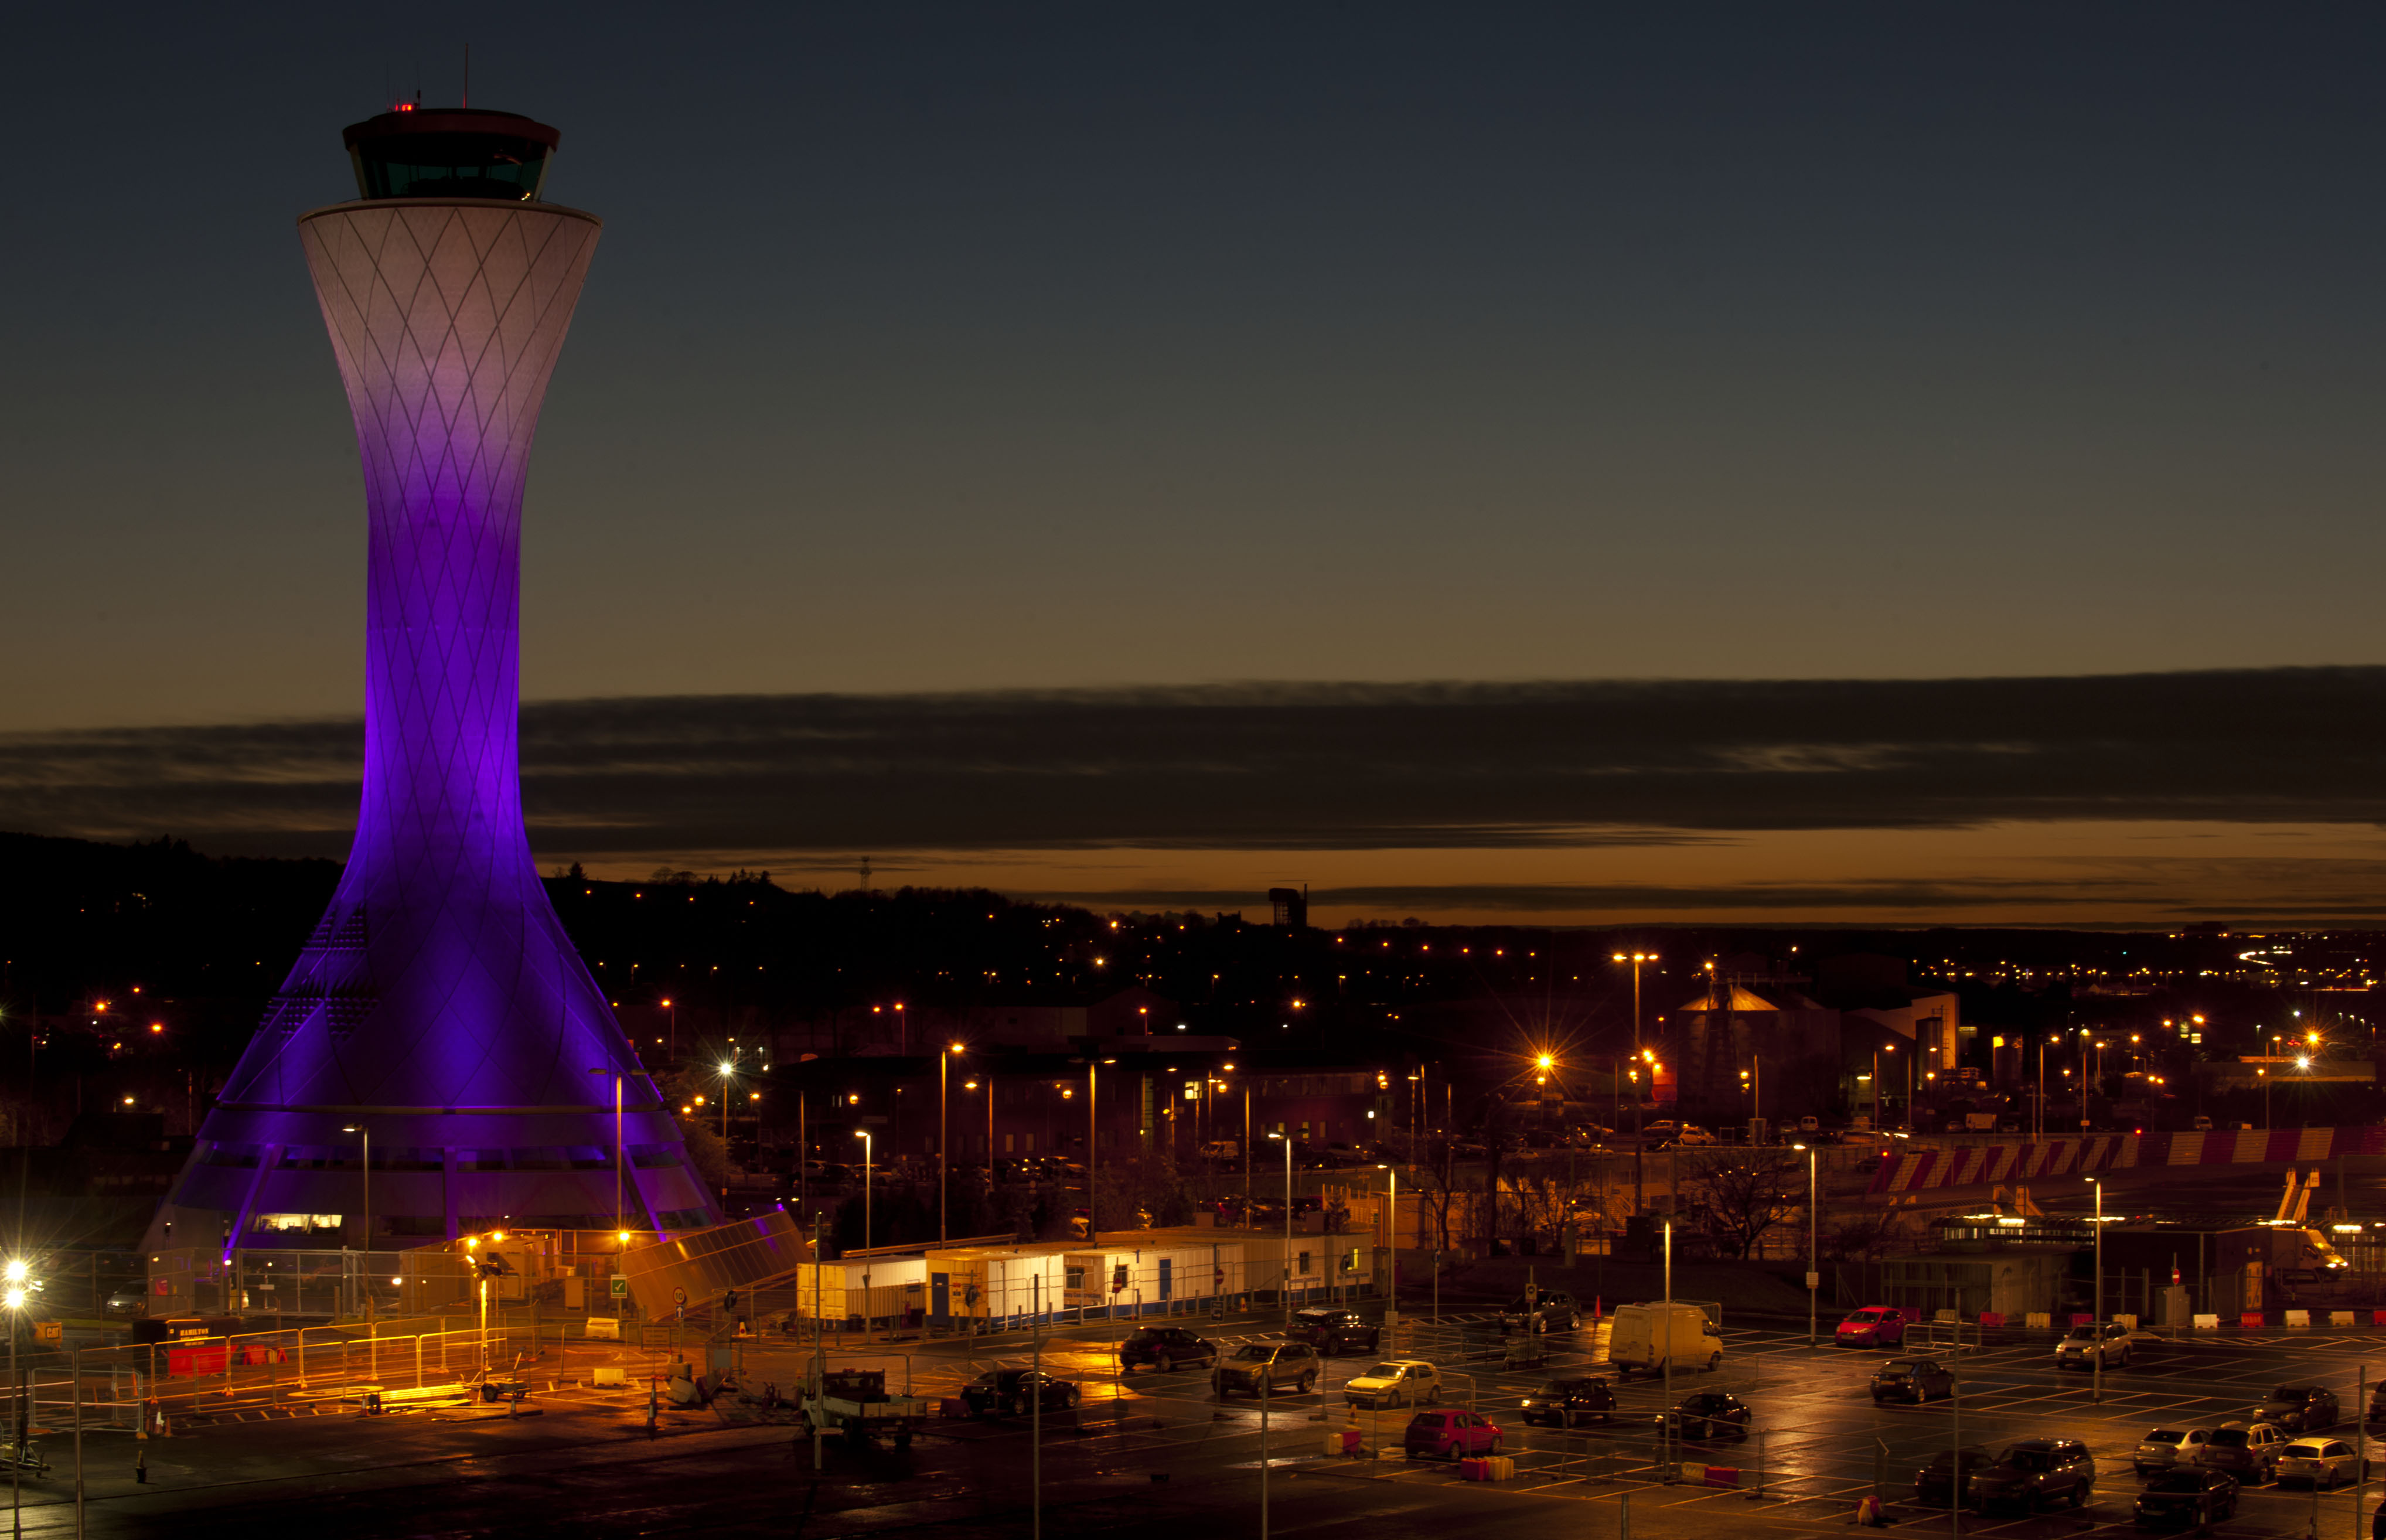 A night photo of the Edinburgh Airport's tower in pink to mark ownership change